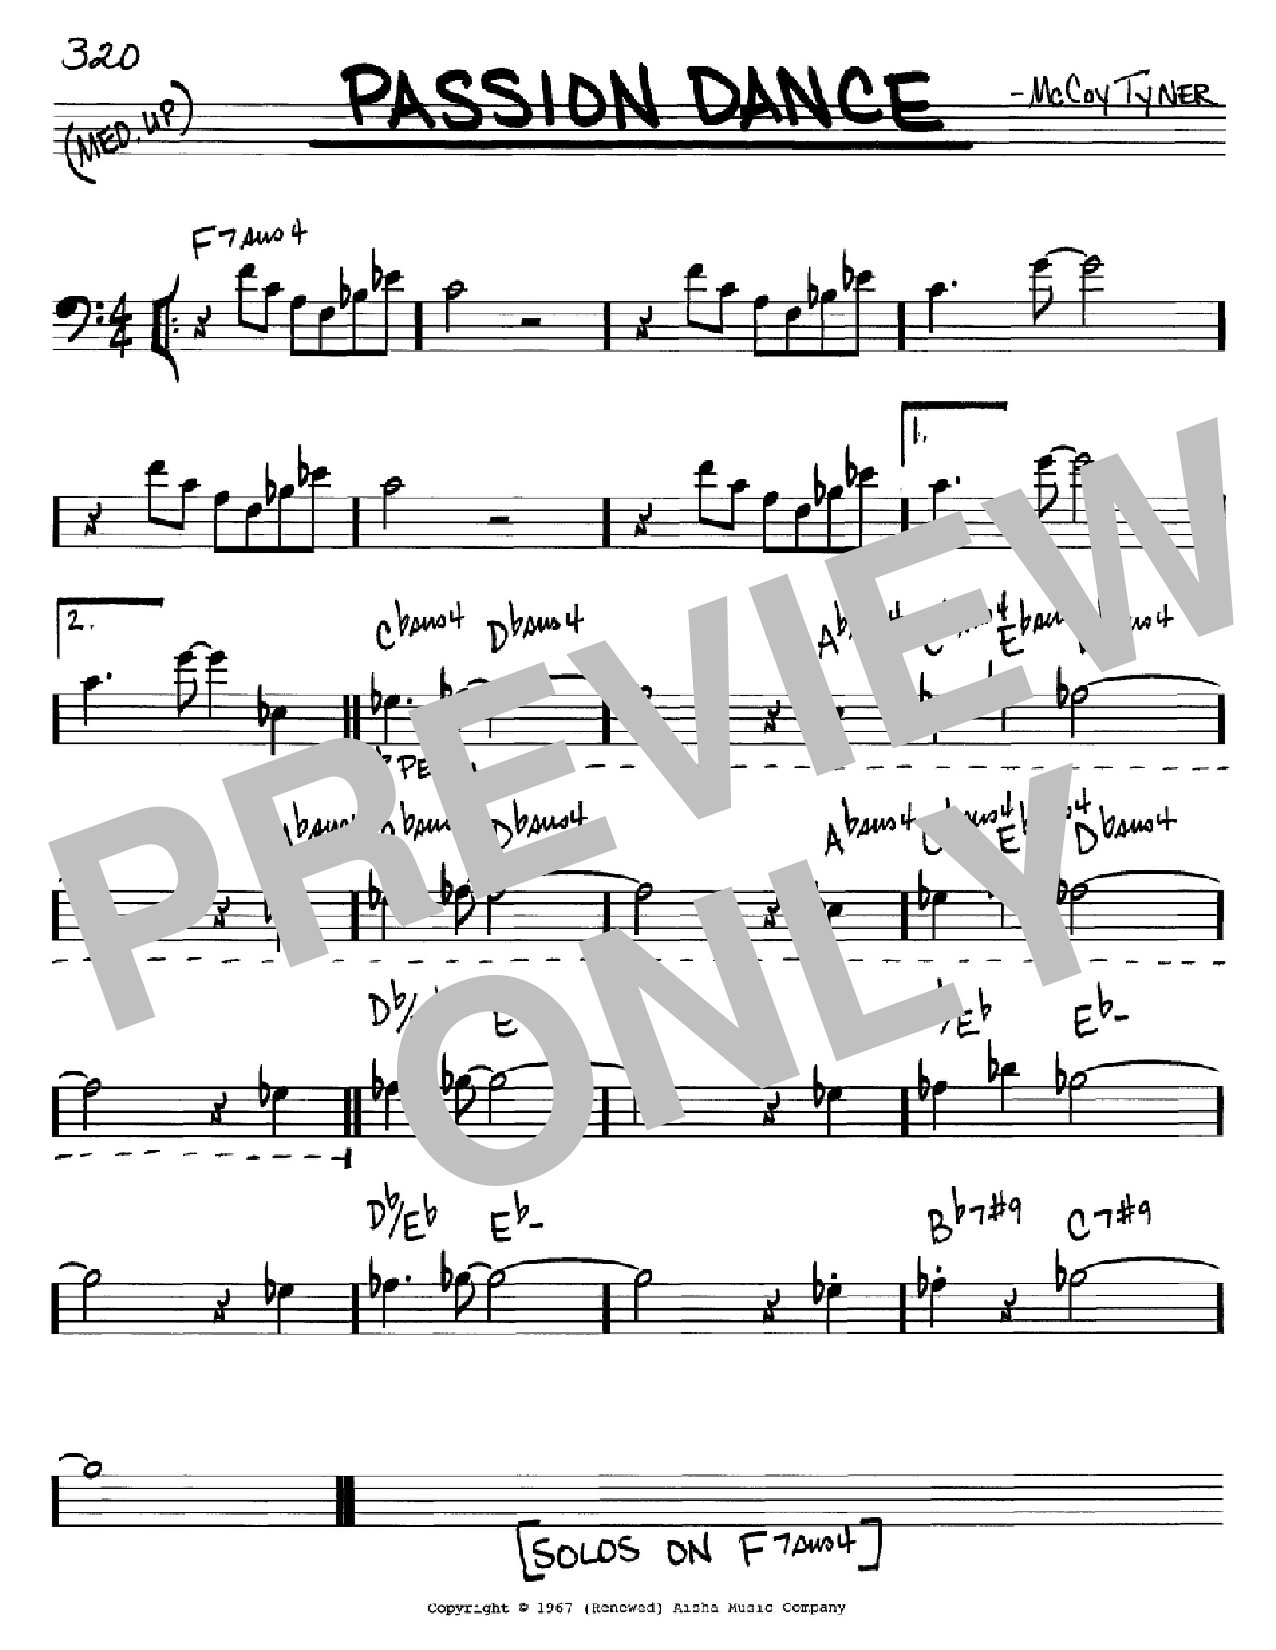 McCoy Tyner Passion Dance sheet music notes and chords. Download Printable PDF.